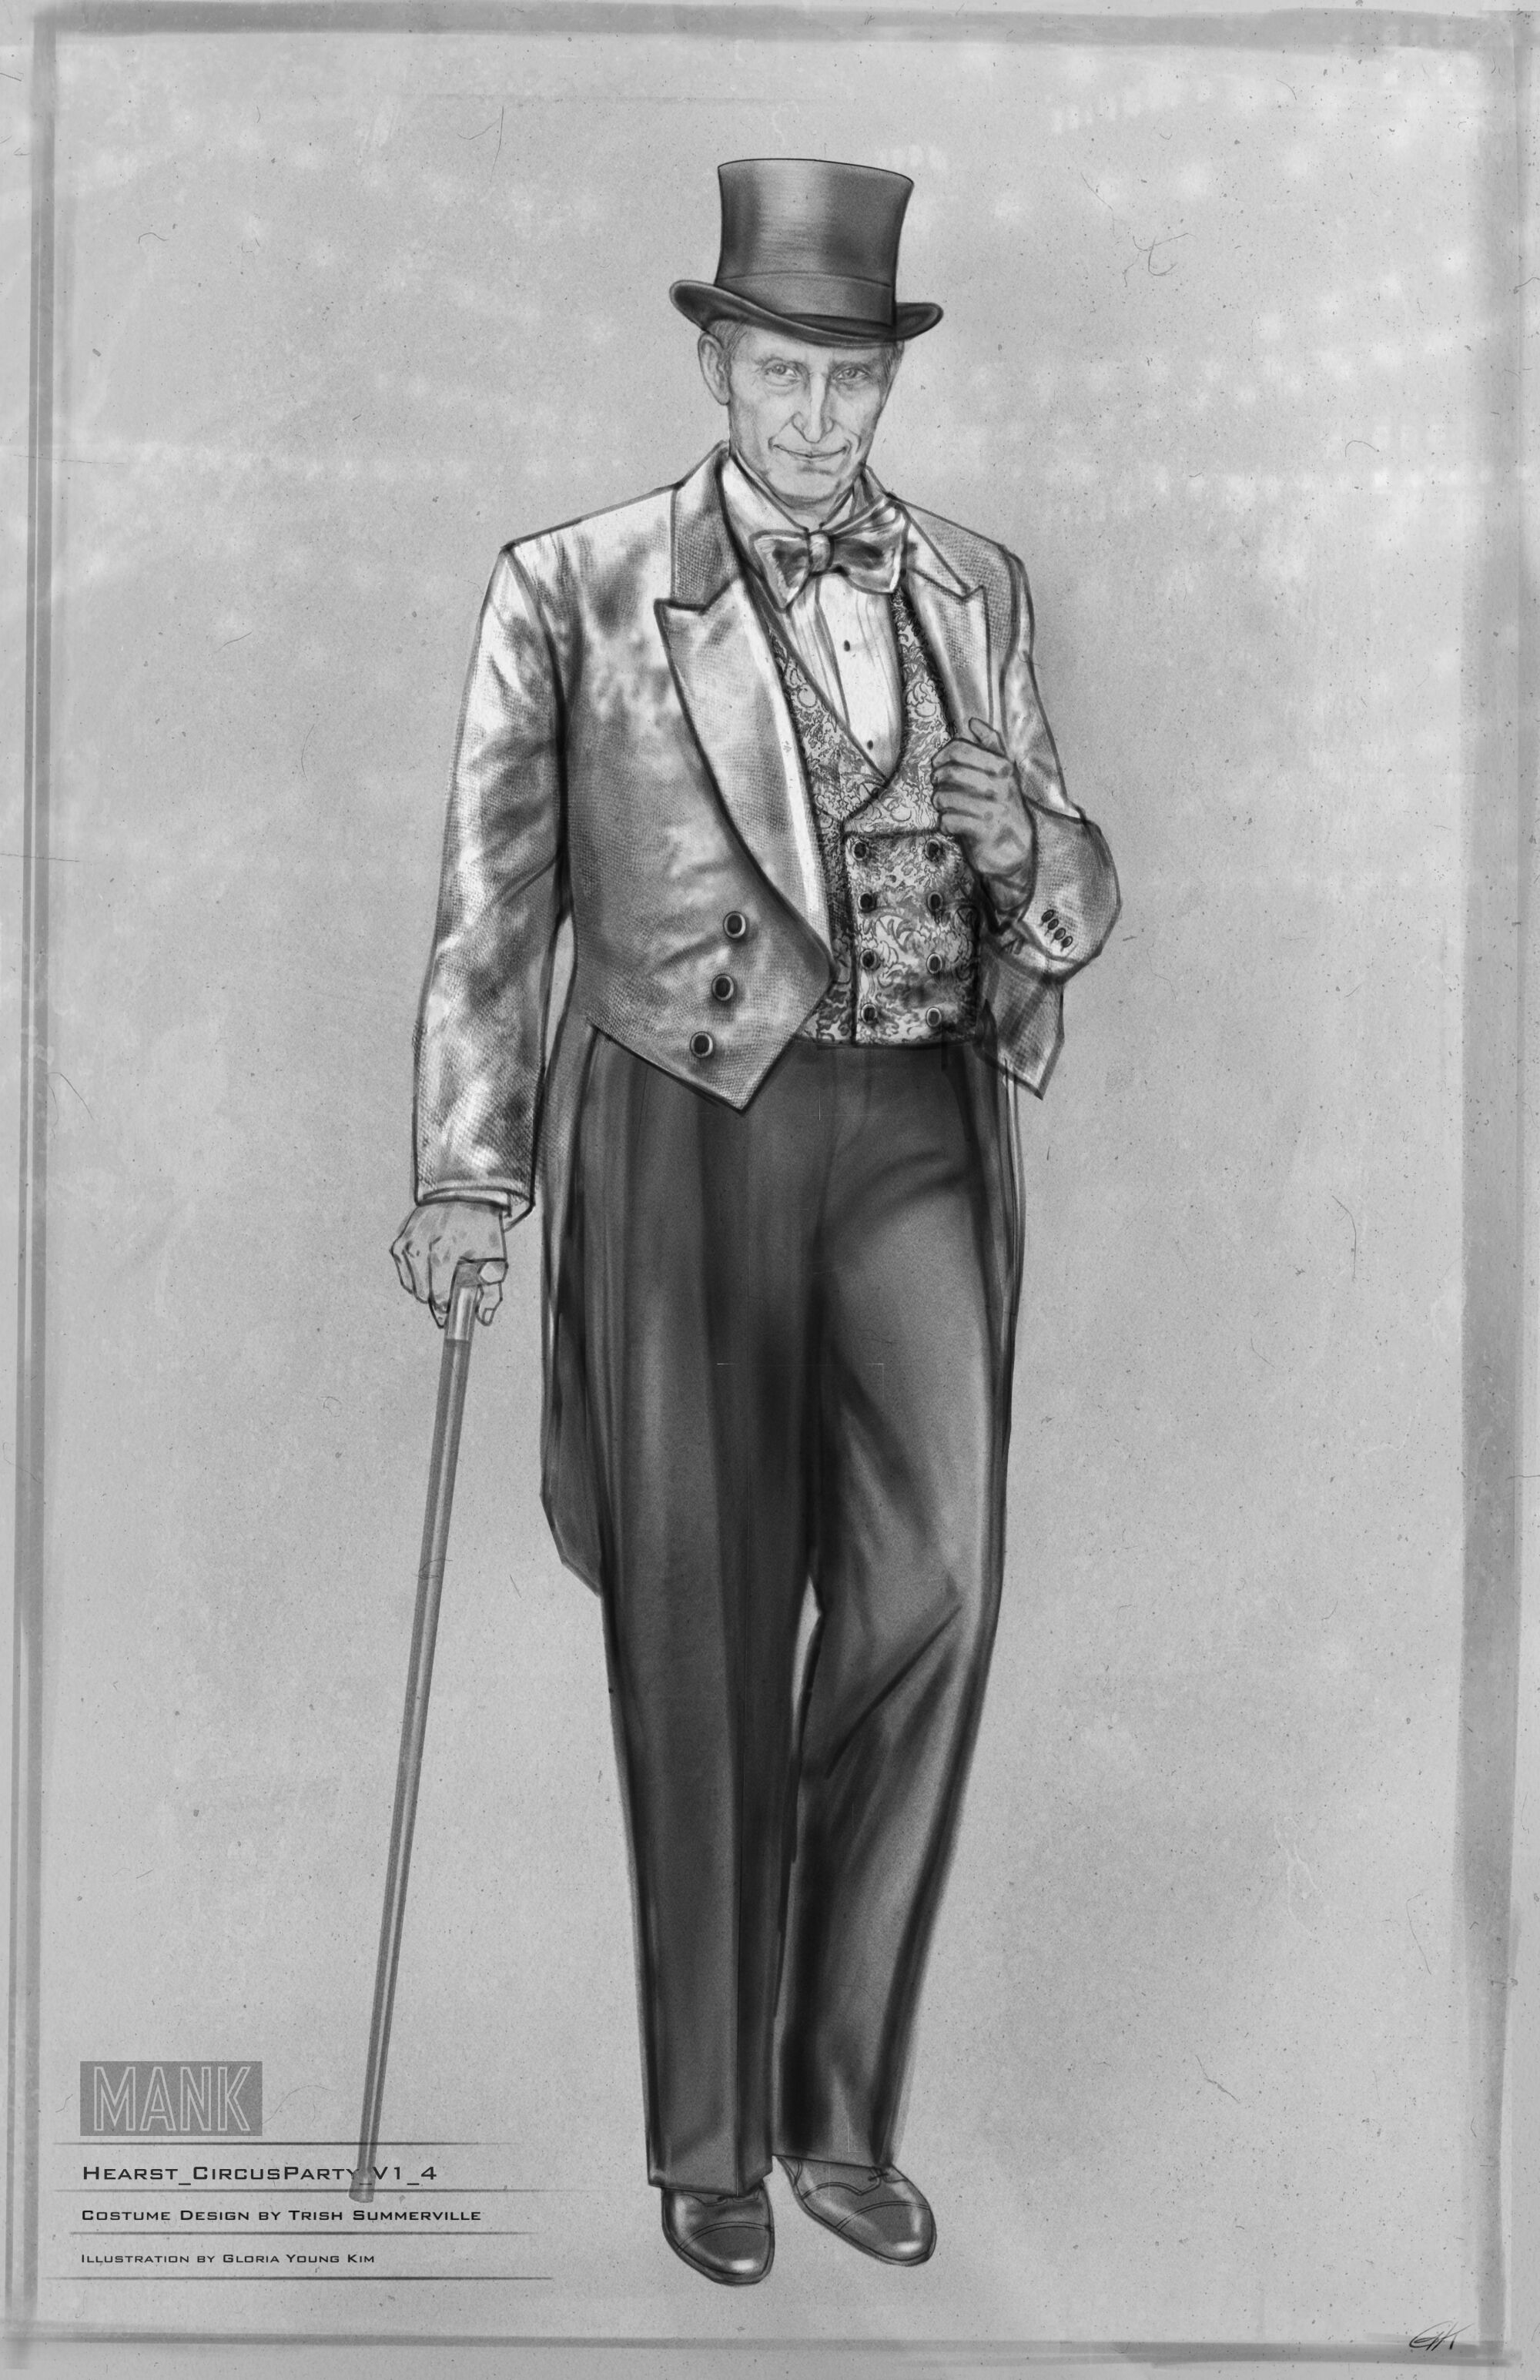 A sketch of a costume design by Trish Summerville 